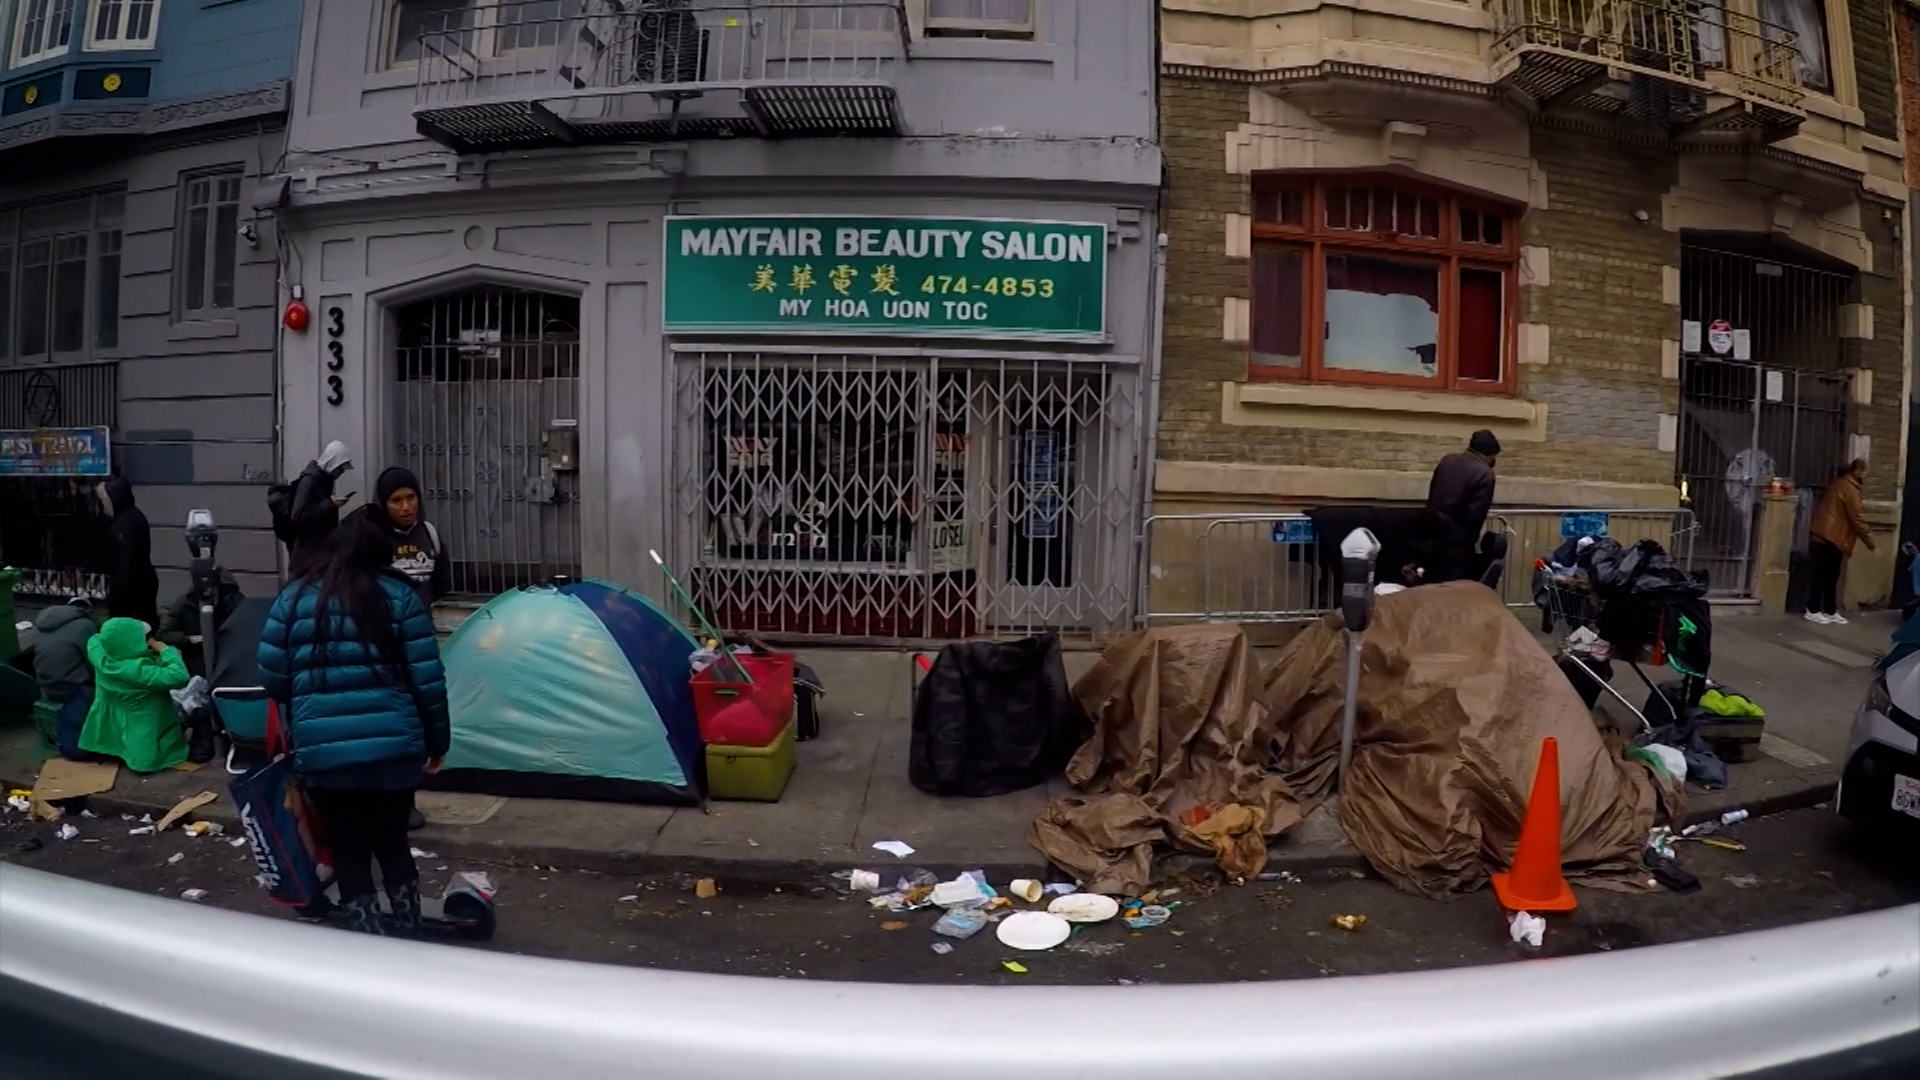 This is an image of impoverished and homeless folks on the streets of San Francisco.